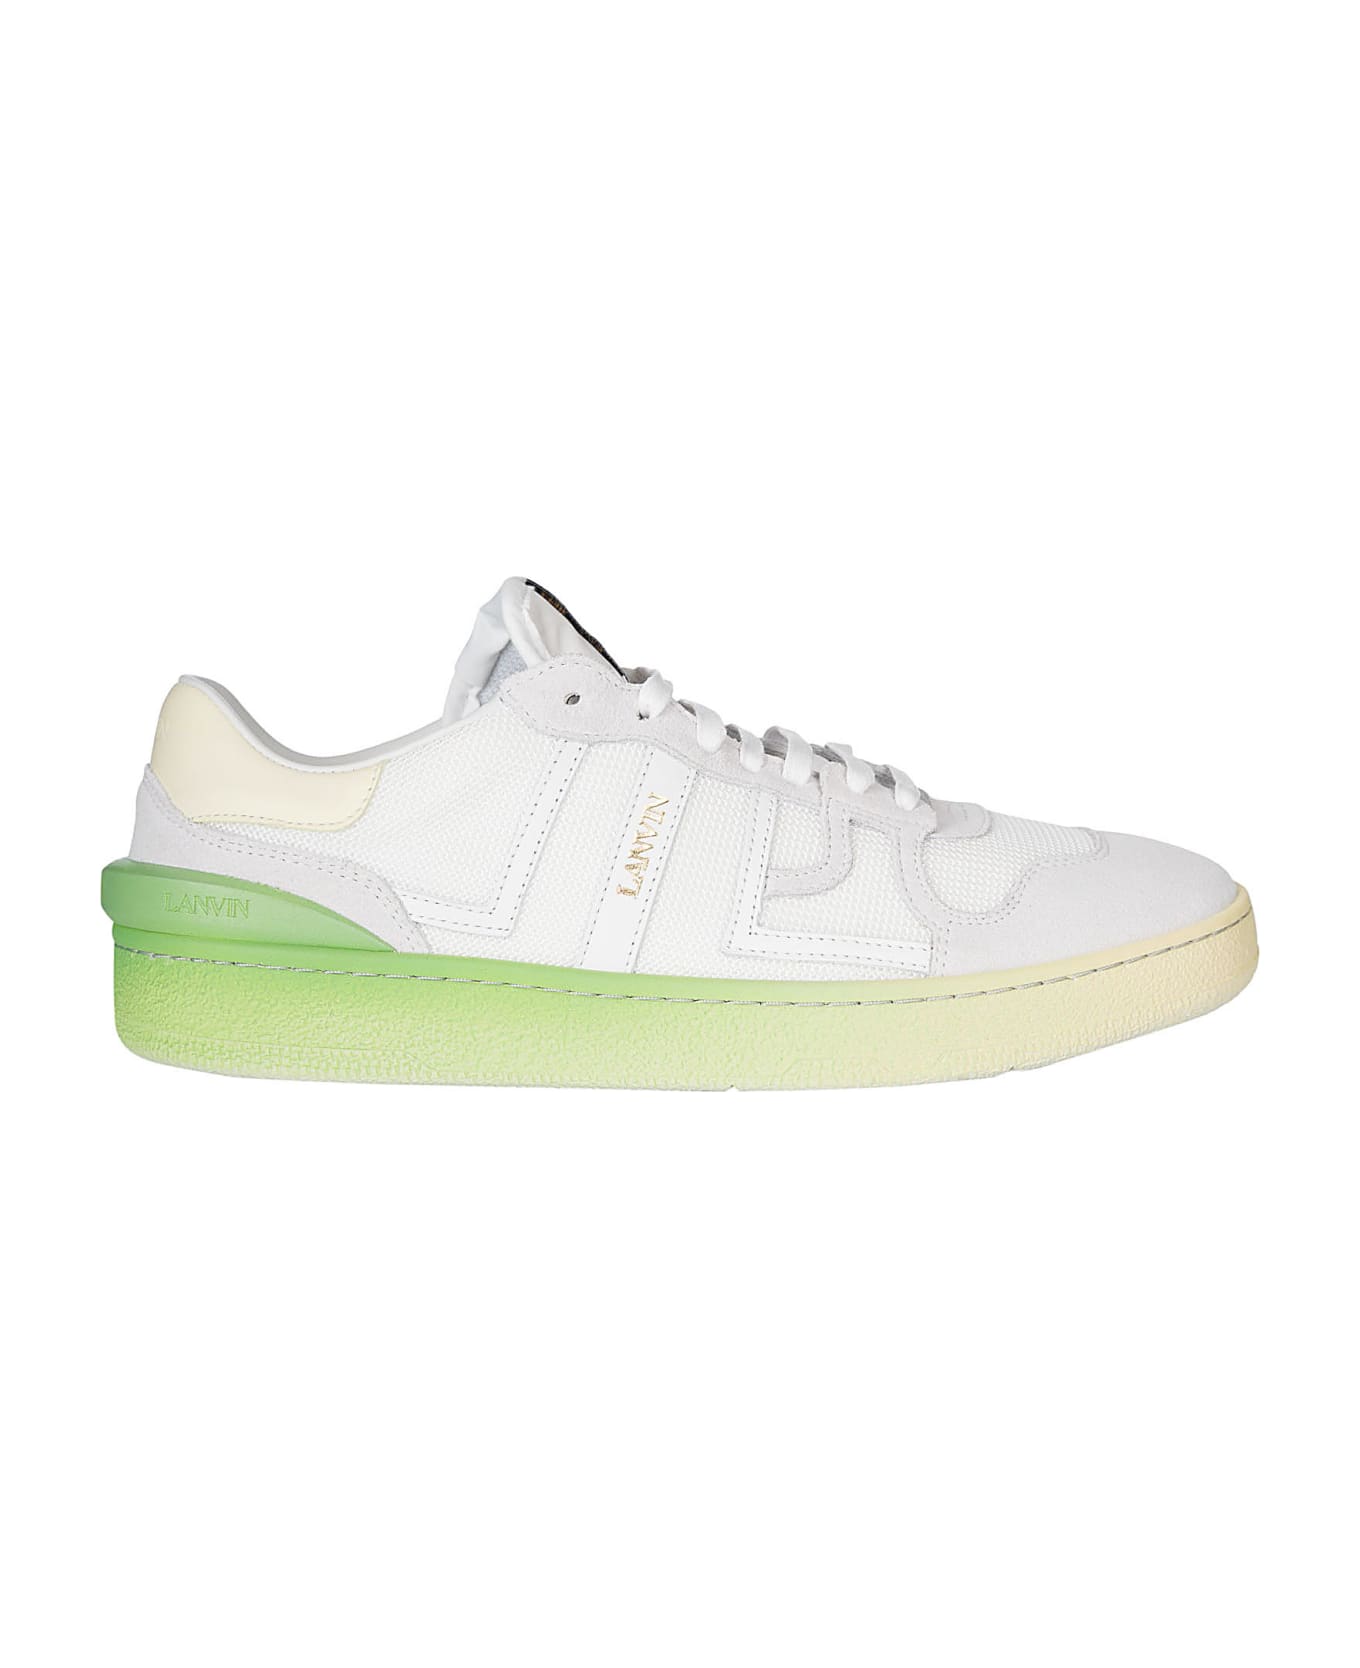 Lanvin Clay Low Top Sneakers - White/Yellow